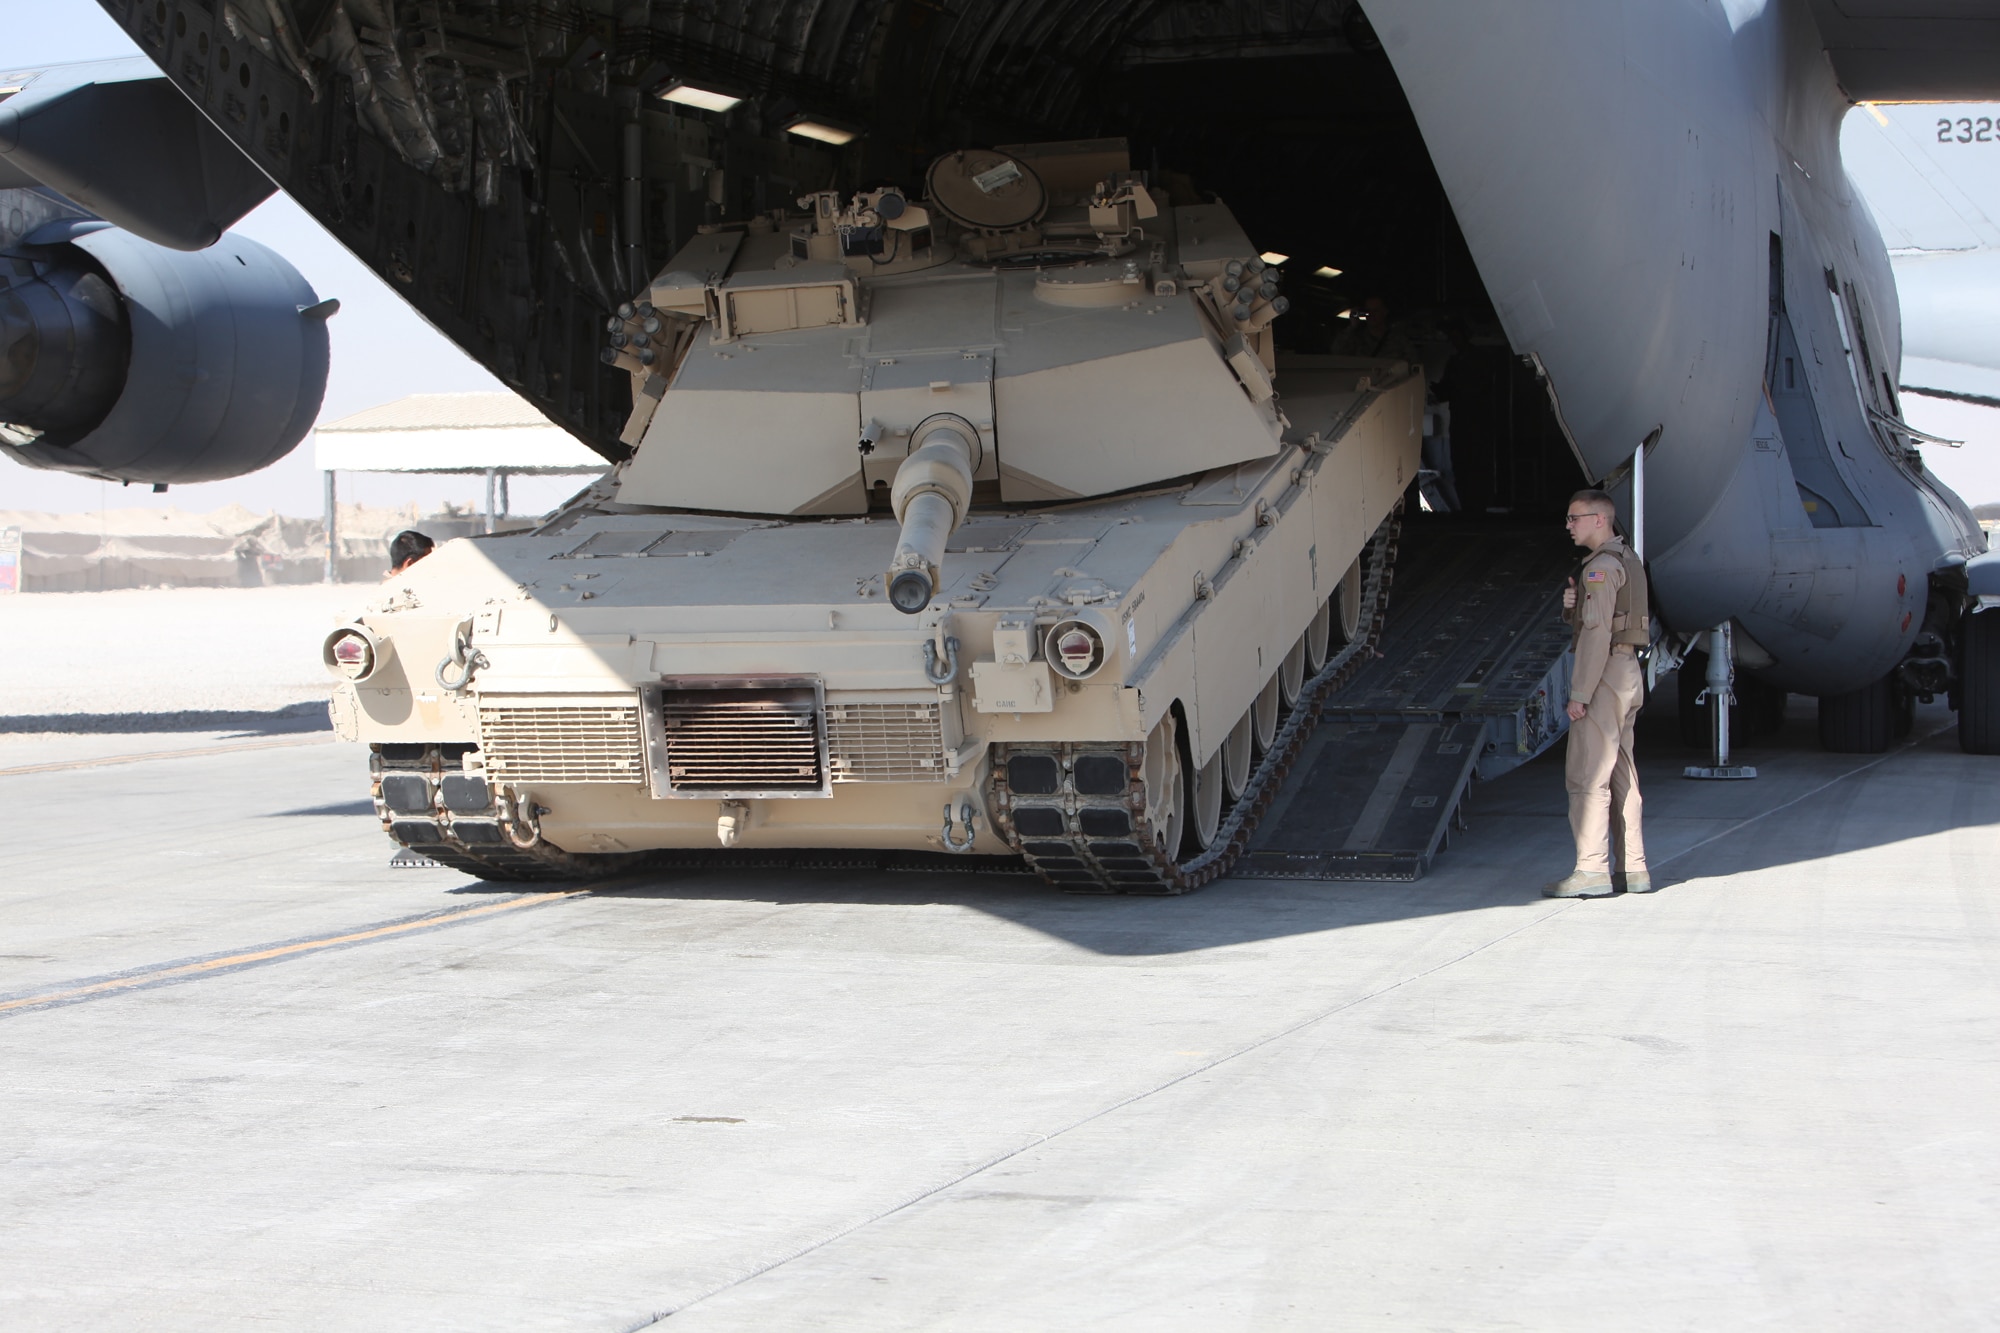 A U.S. Marine Corps M1A2 Abrams main battle tank is offloaded aboard Camp Bastion, Afghanistan Nov. 25, 2010.  The Marine tank was flown in country on-board a U.S Air Force Boeing C-17 Globemaster III and marks the first to arrive. ( U.S. Marine Corps photo by LCpl McKenzie James / Released)